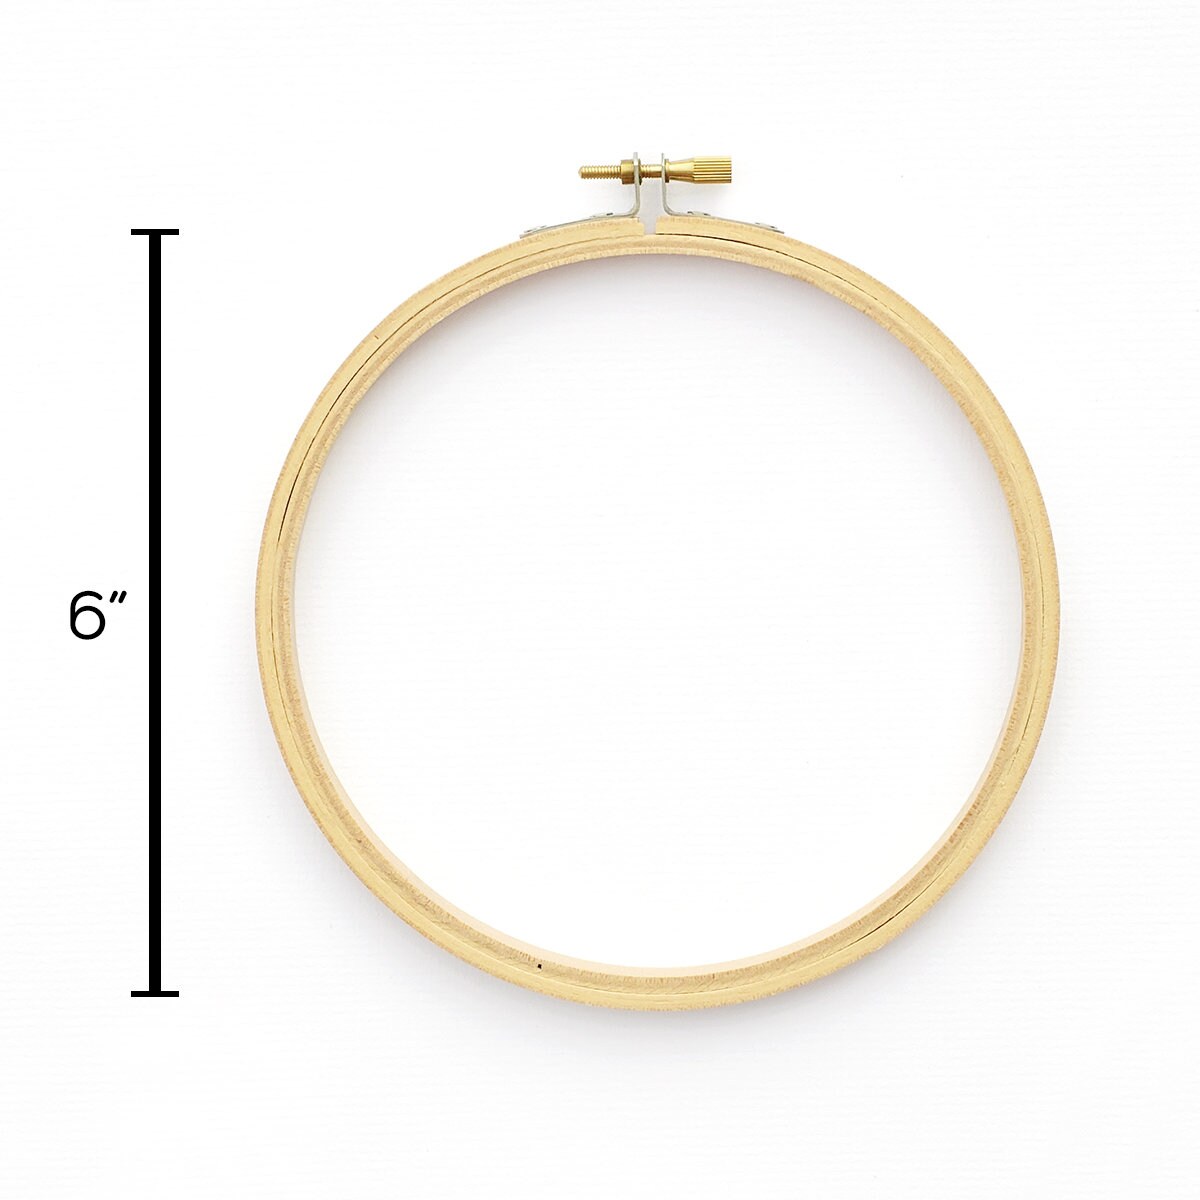 6 inch Round Wooden Embroidery Hoop 1 Piece